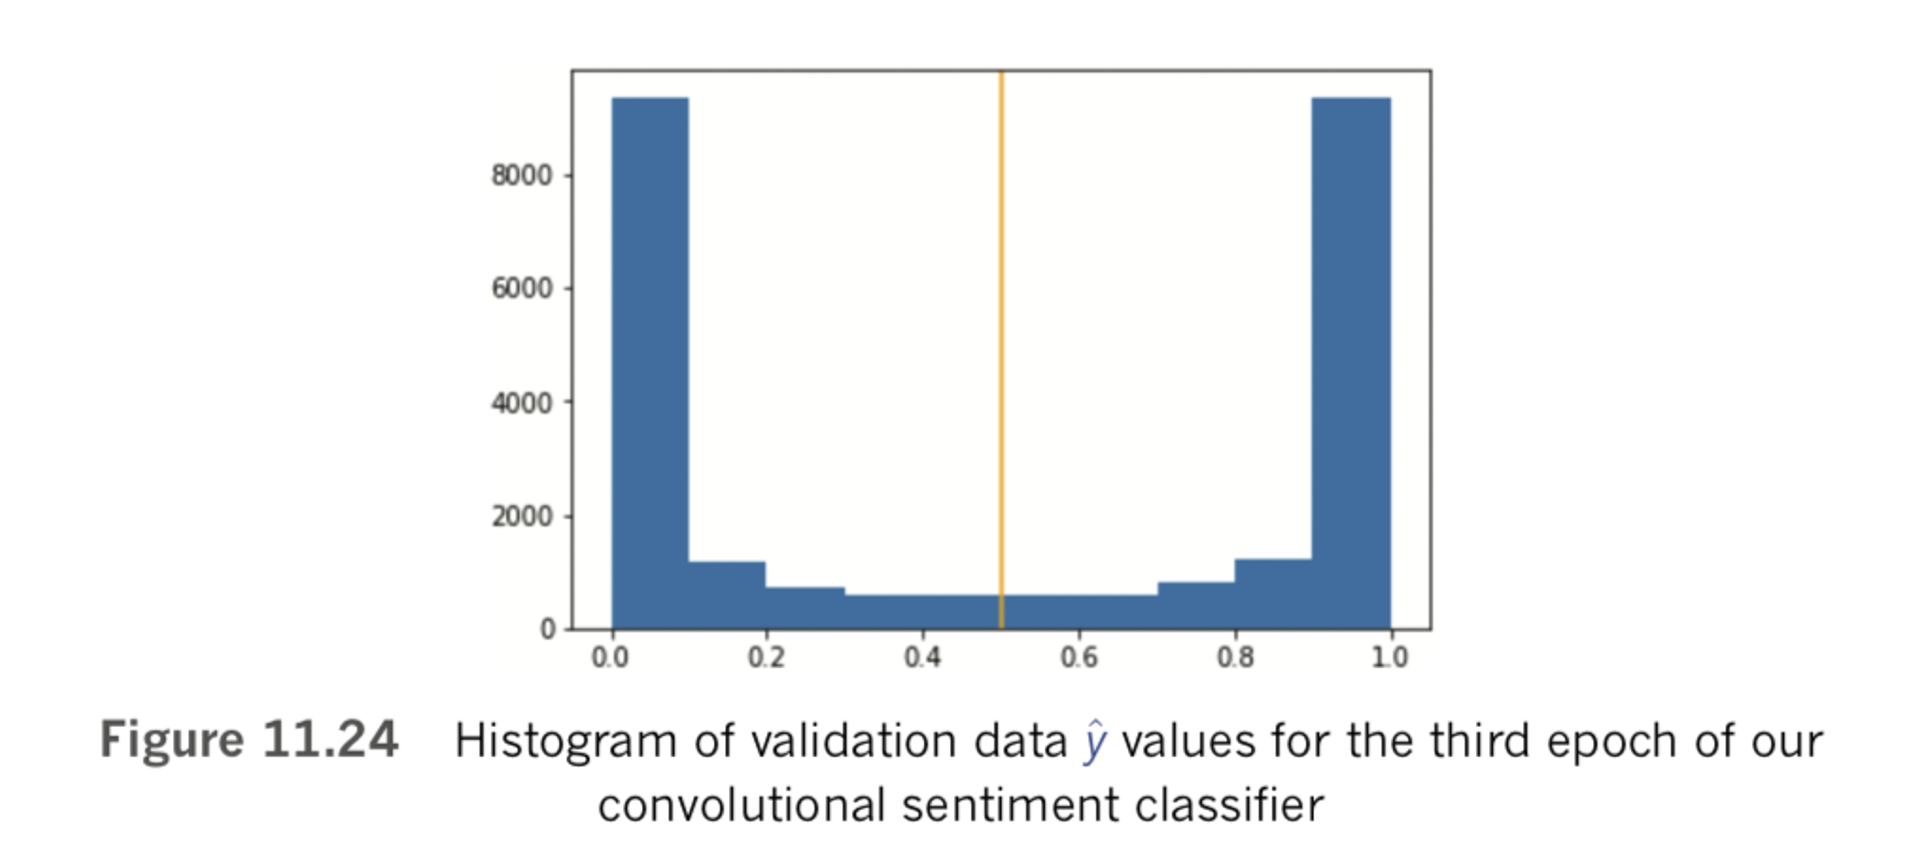 Histogram of validation data y values for the third epoch of the convolution sentiment classifier